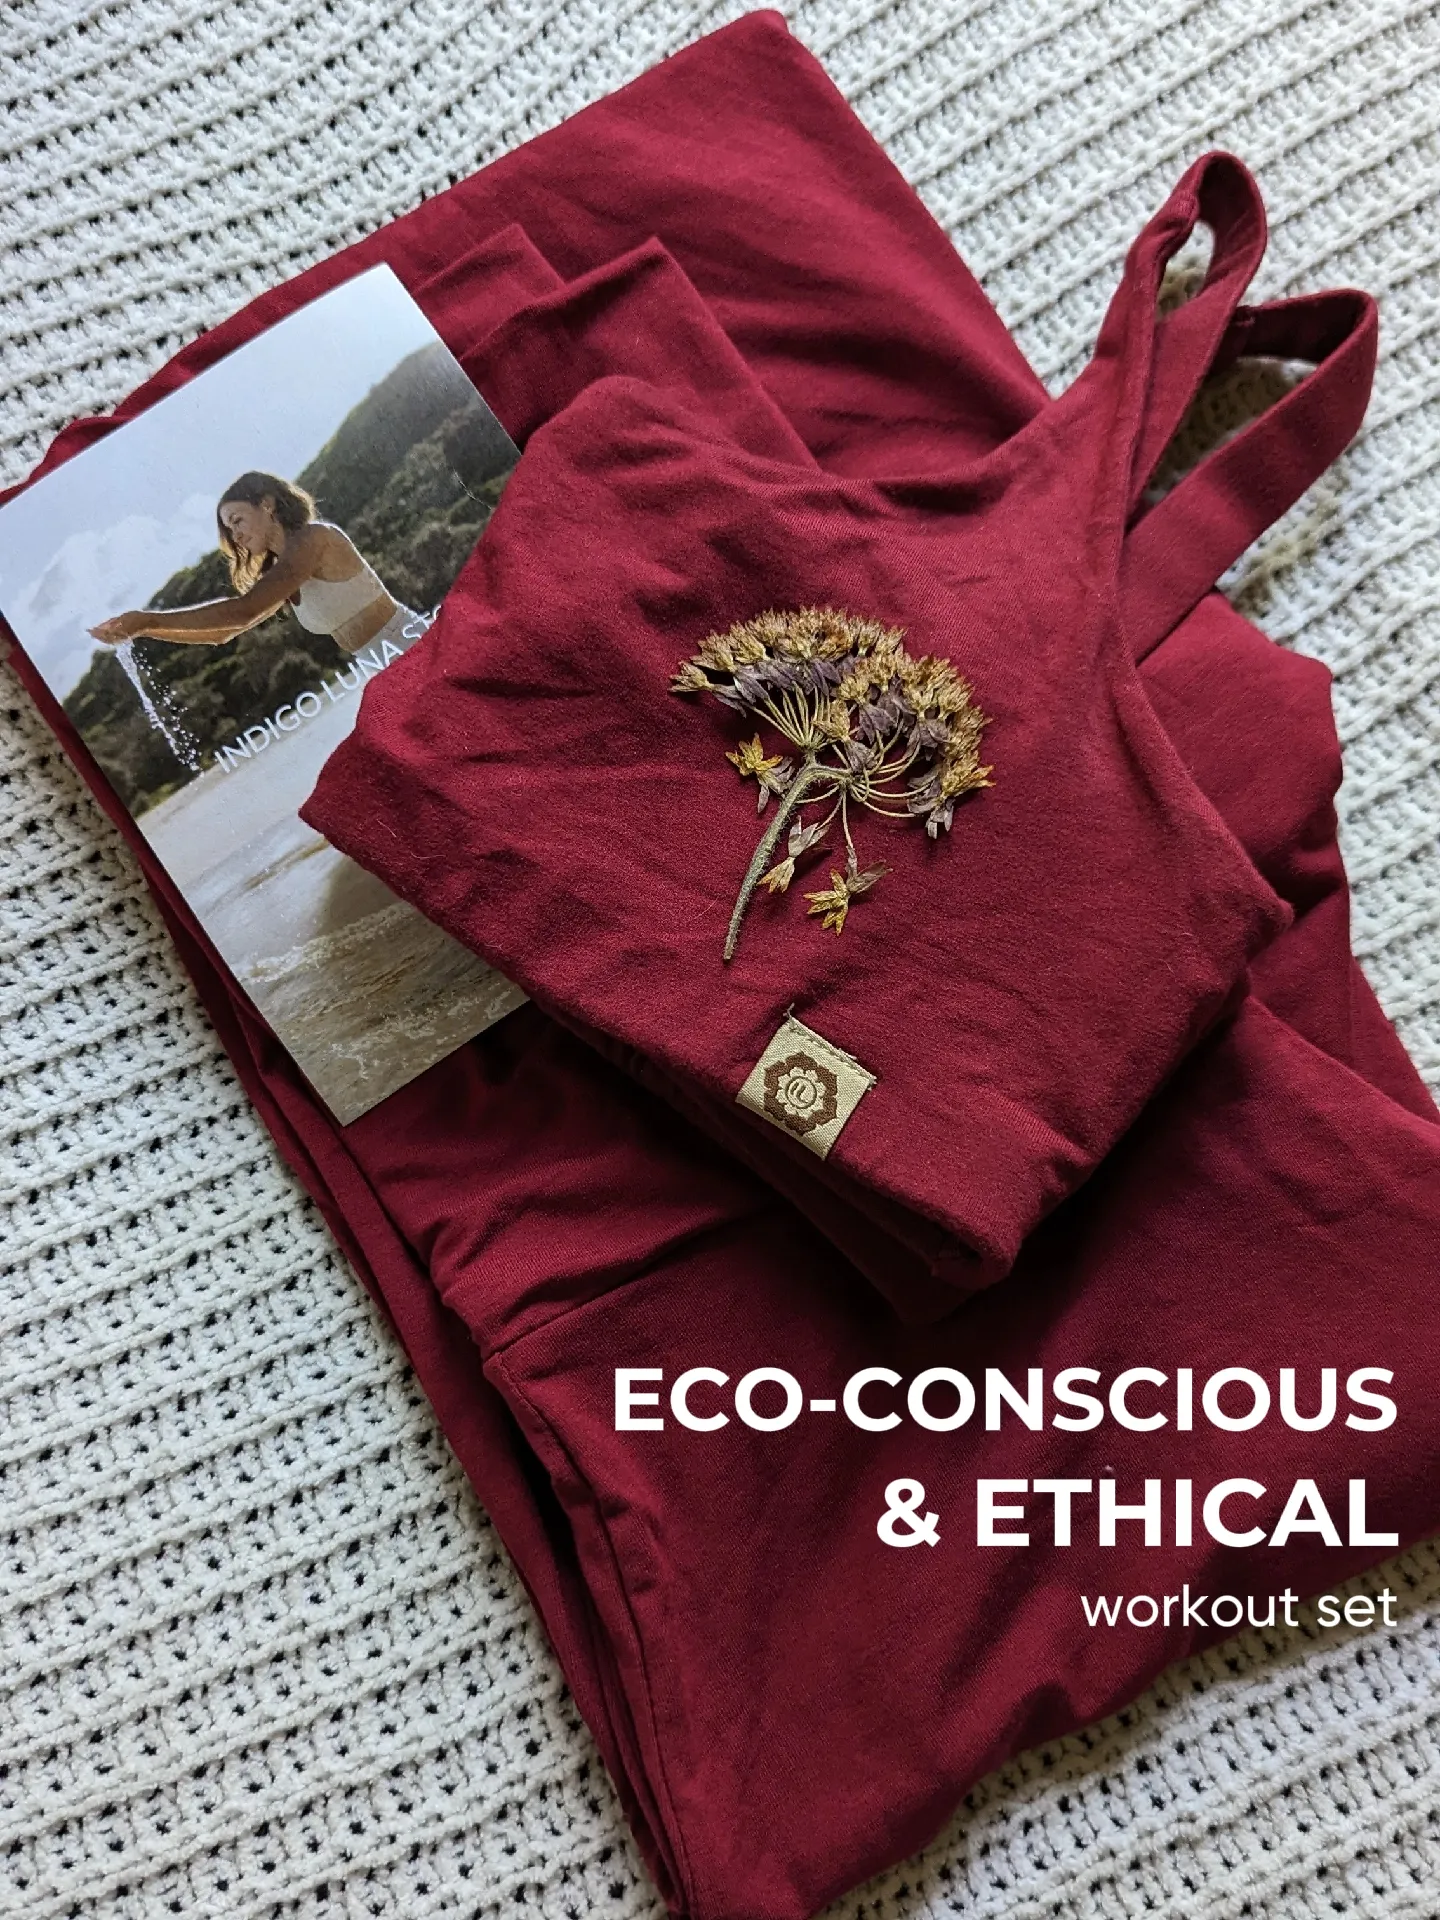 FINALLY! a sustainable fitness clothing brand ❤️, Gallery posted by Eve 🌱